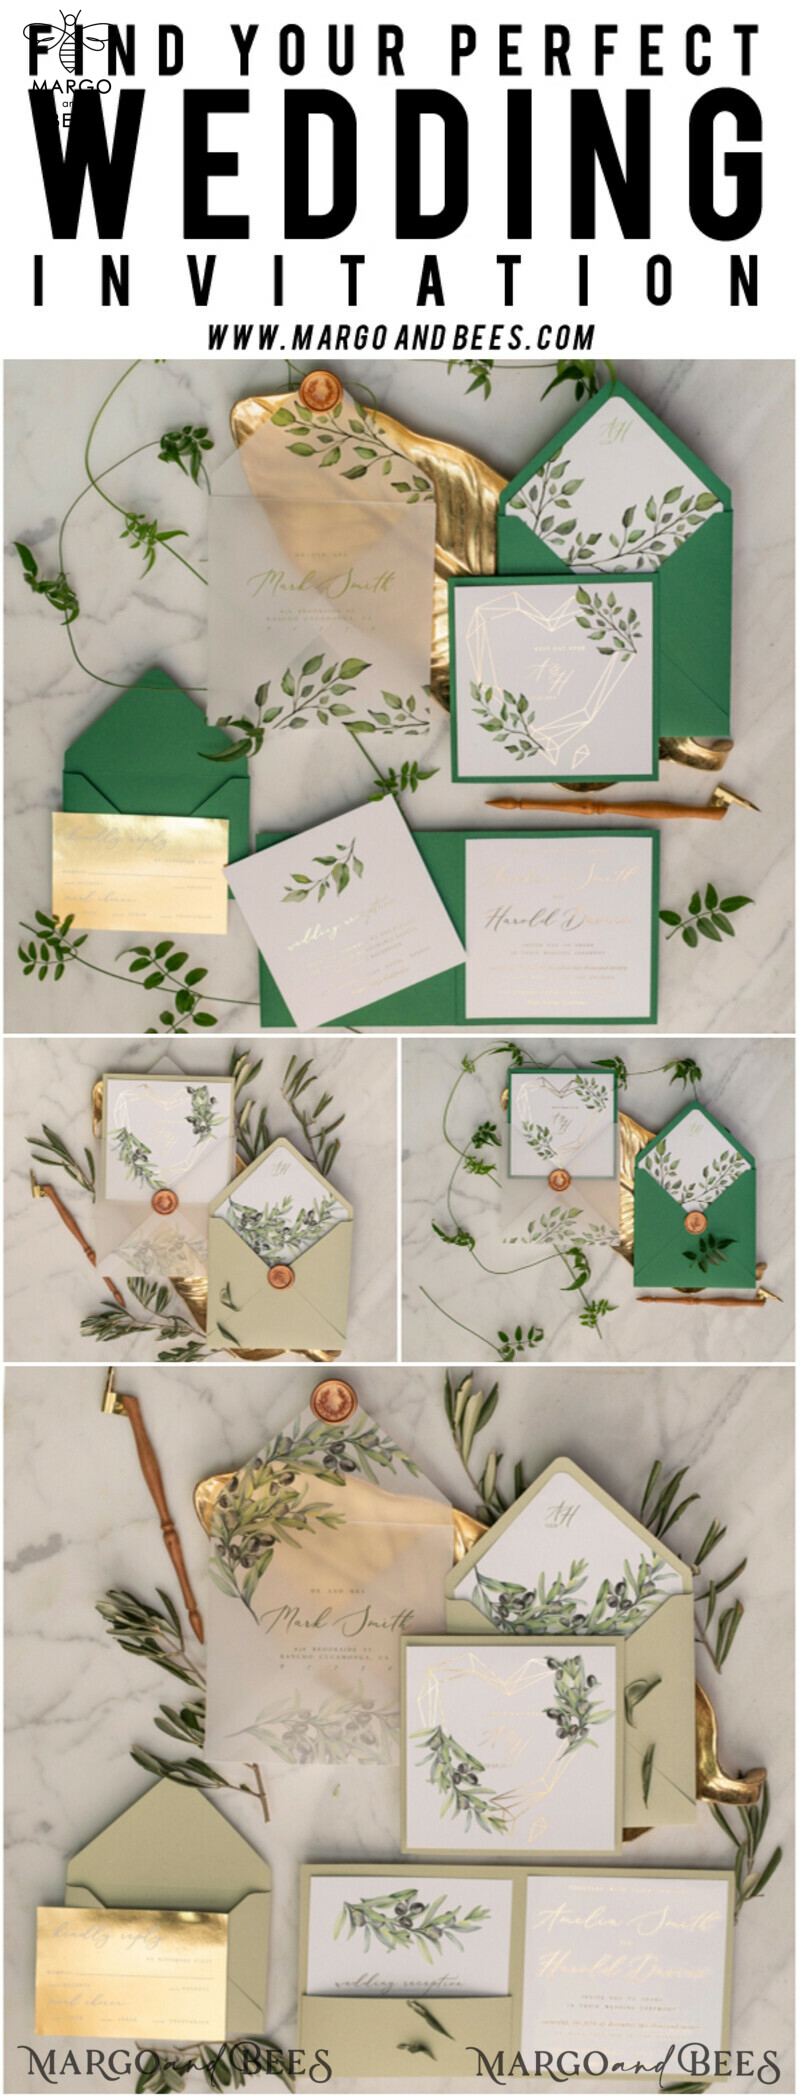 Luxury Gold Foil Wedding Invitations: Elegant Pocketfold Cards with Glamour Greenery and Geometric Vellum Suite-10